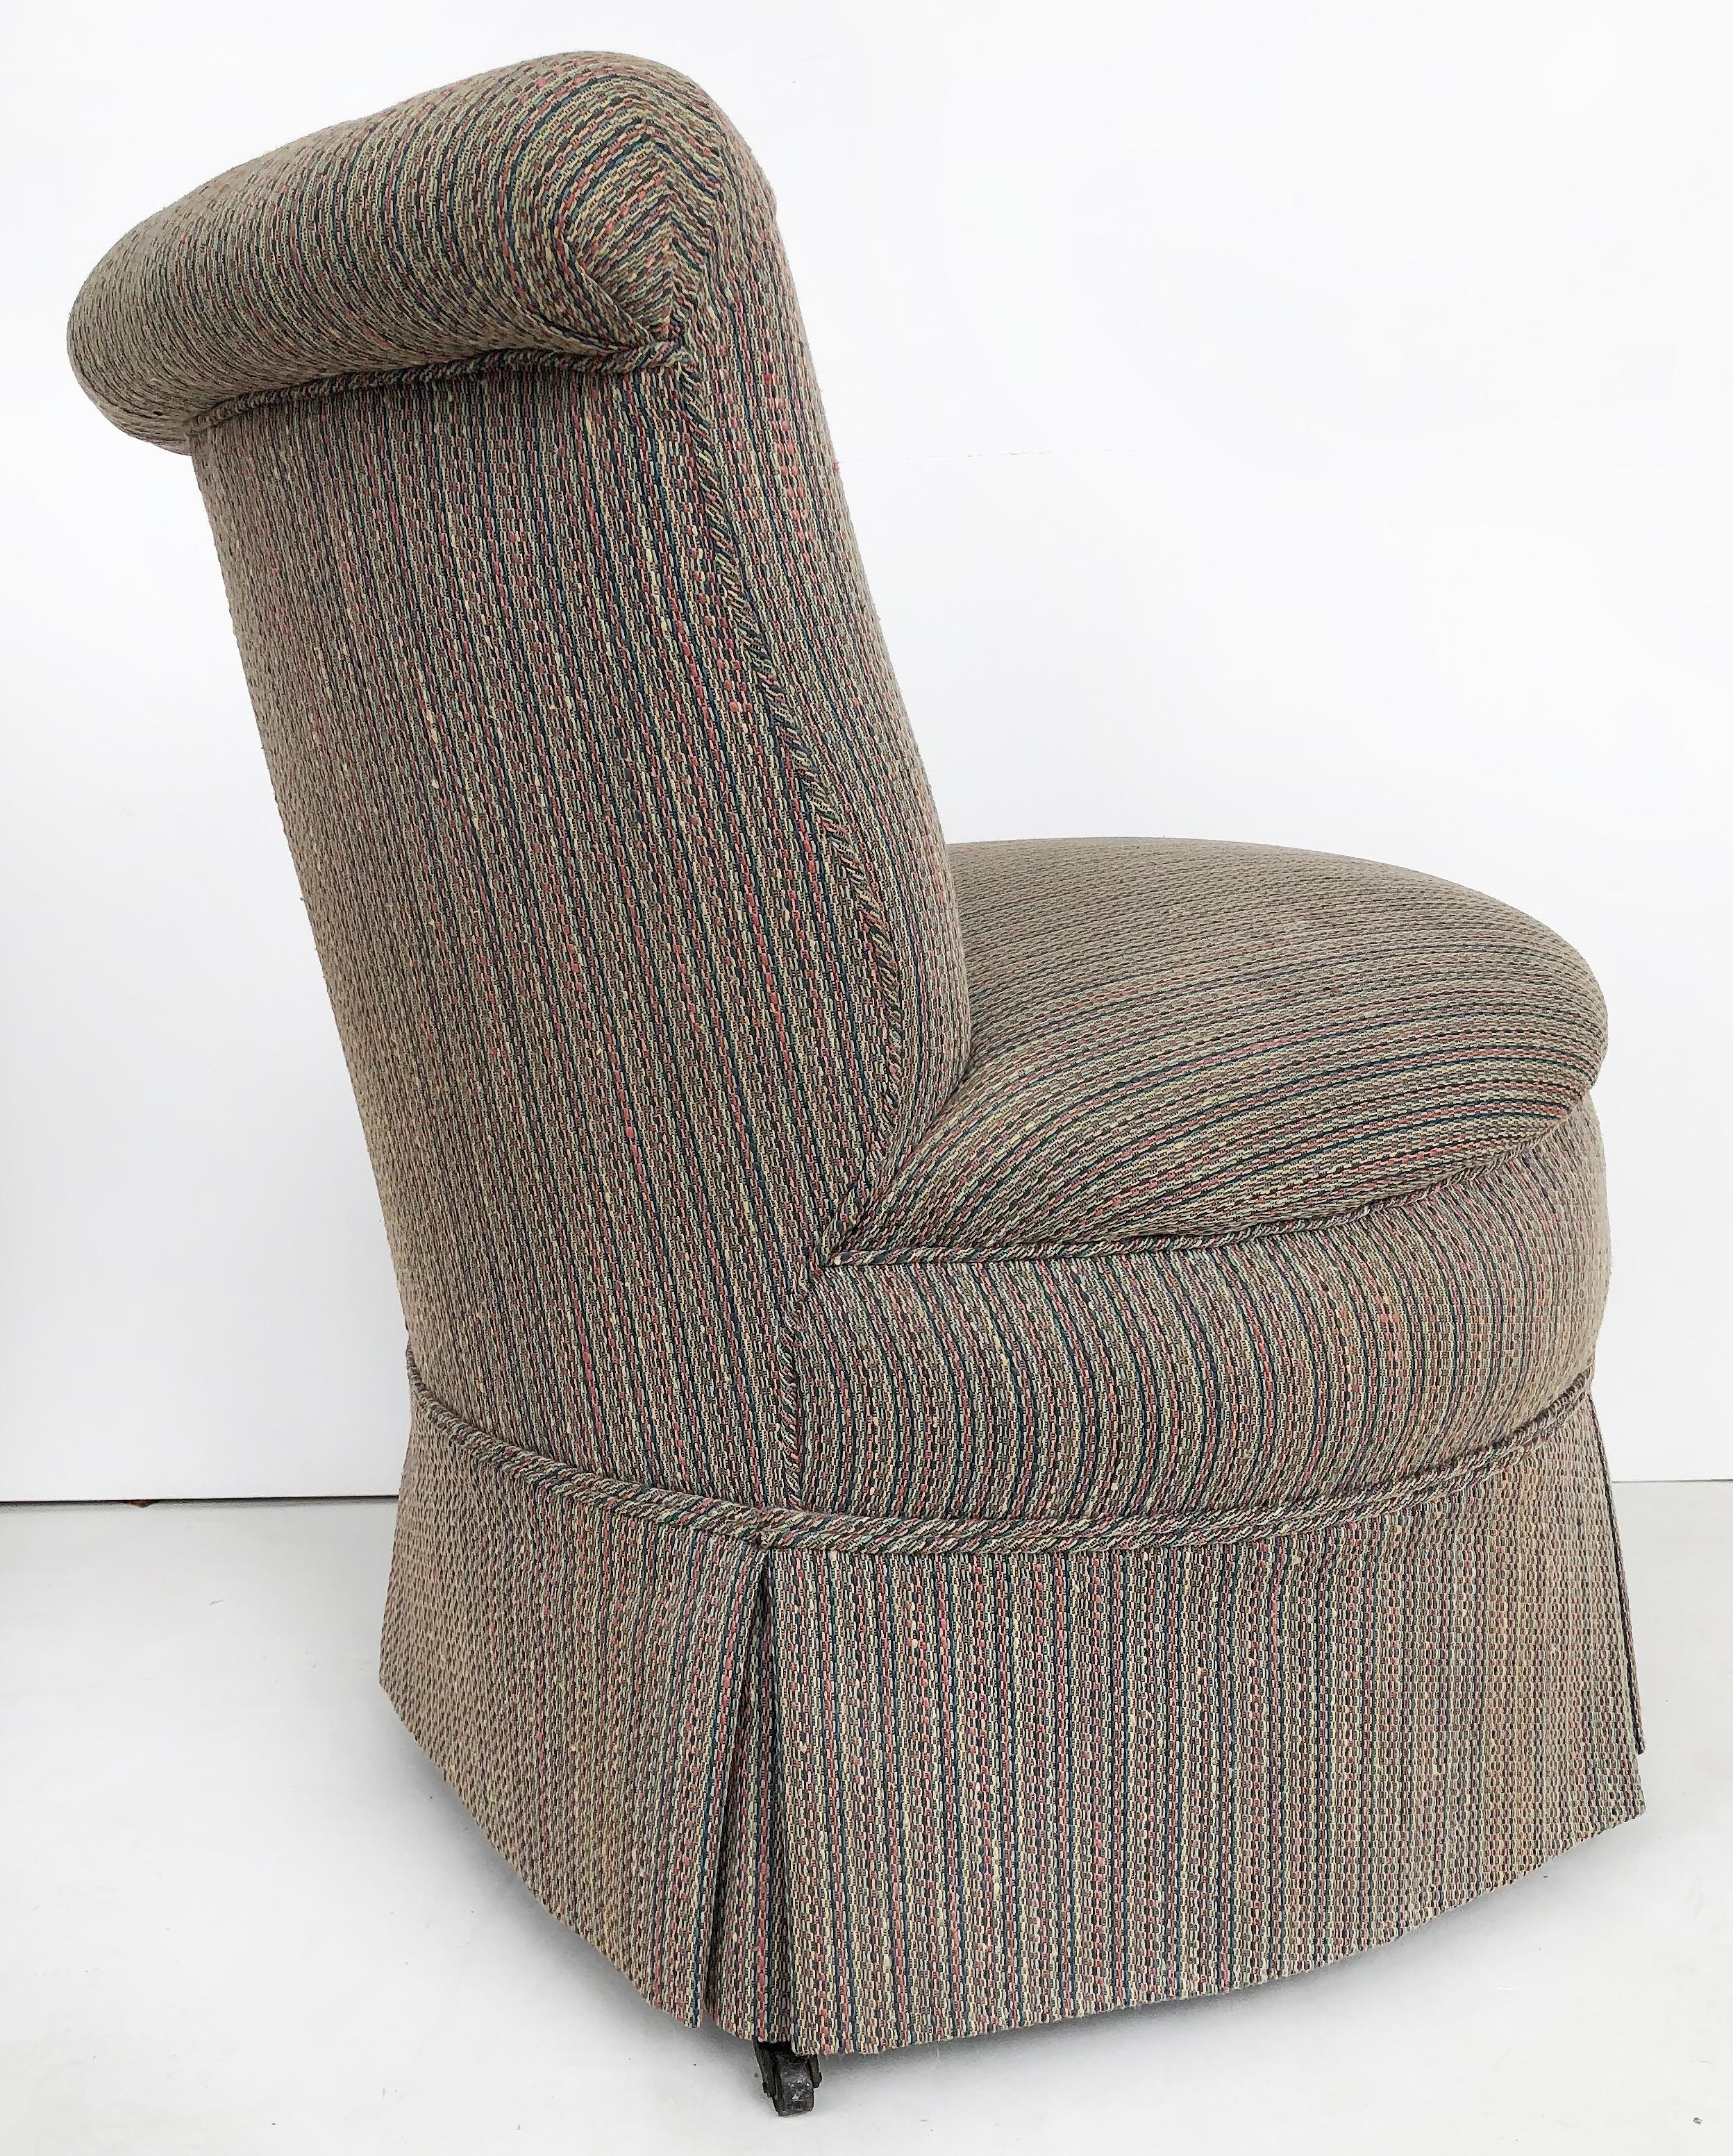 Fabric Antique Napoleon III Slipper Chair circa 1900, Turned Legs on Casters